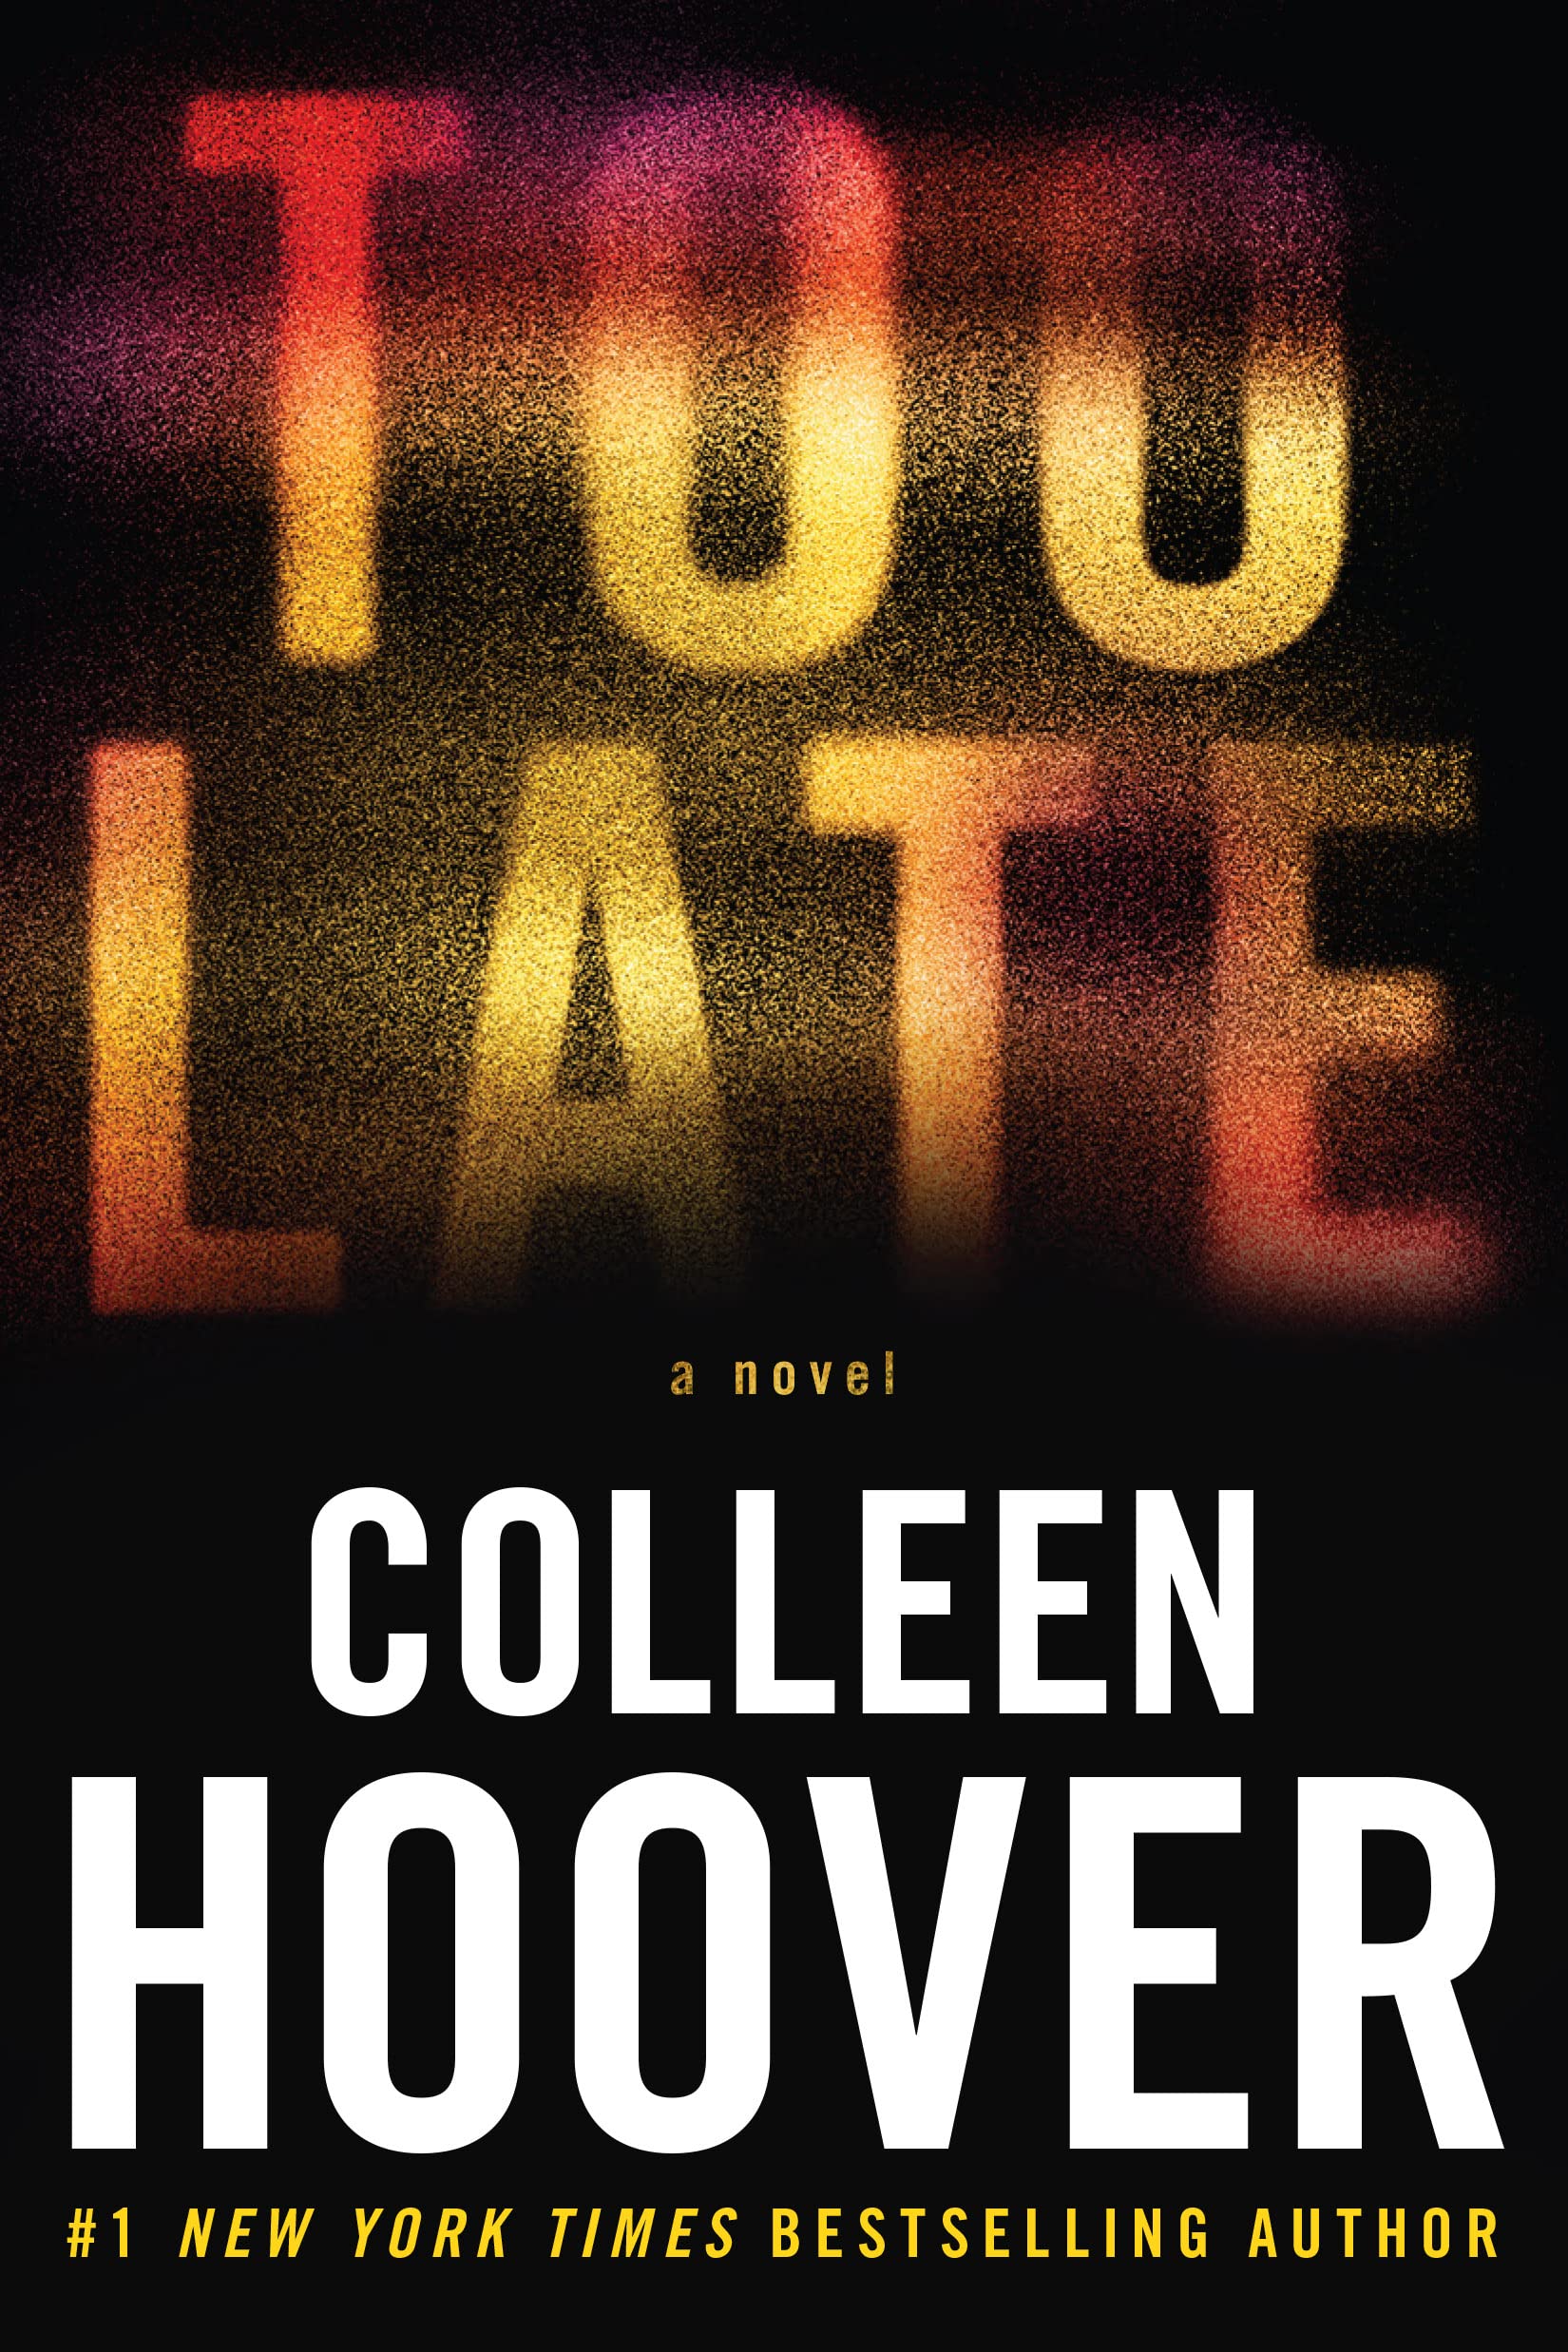 One of our recommended books is Too Late by Colleen Hoover